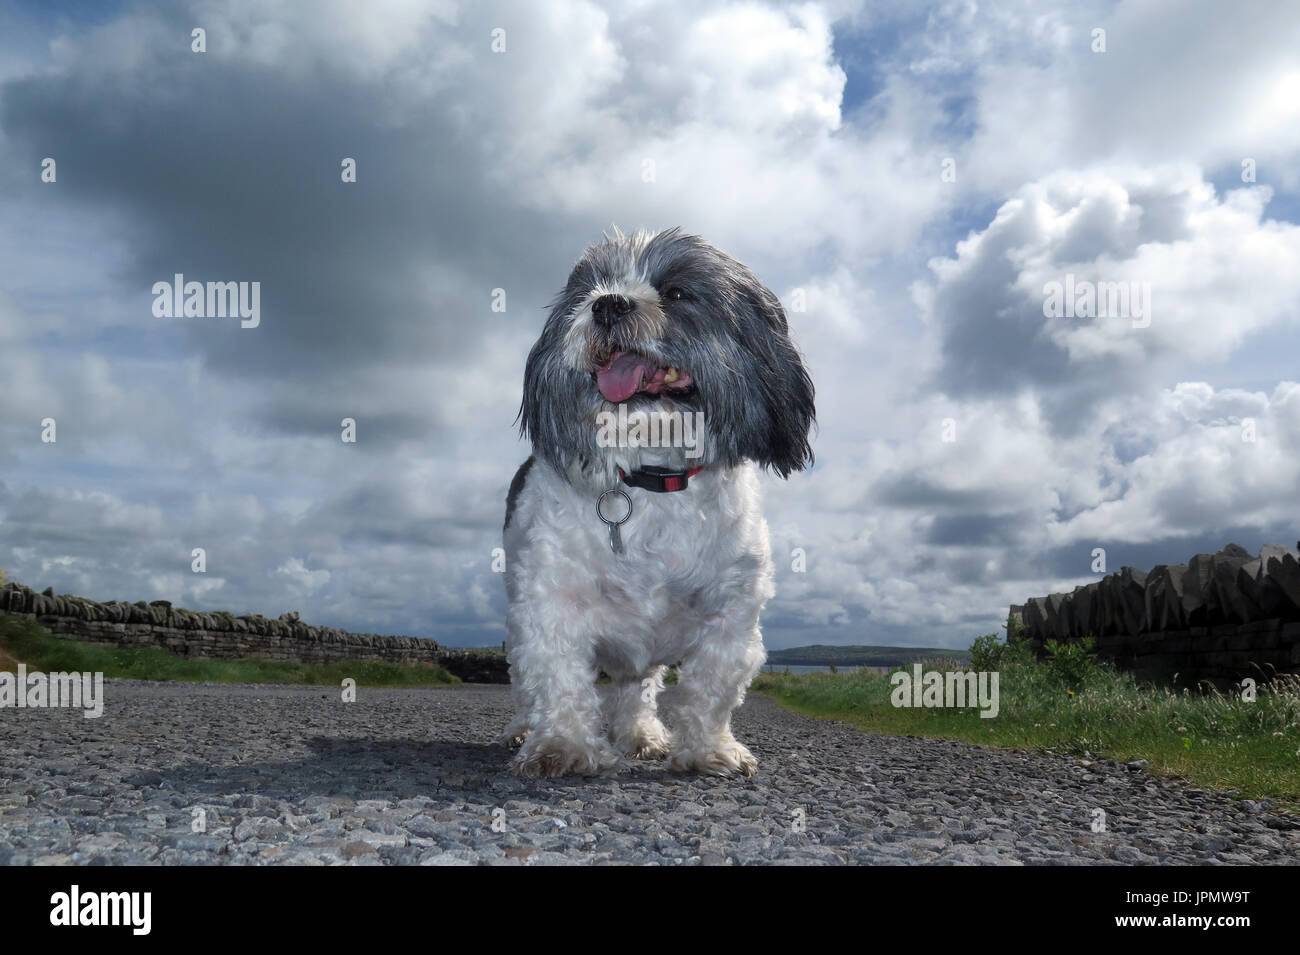 Canine Capers / World of Dog Stock Photo